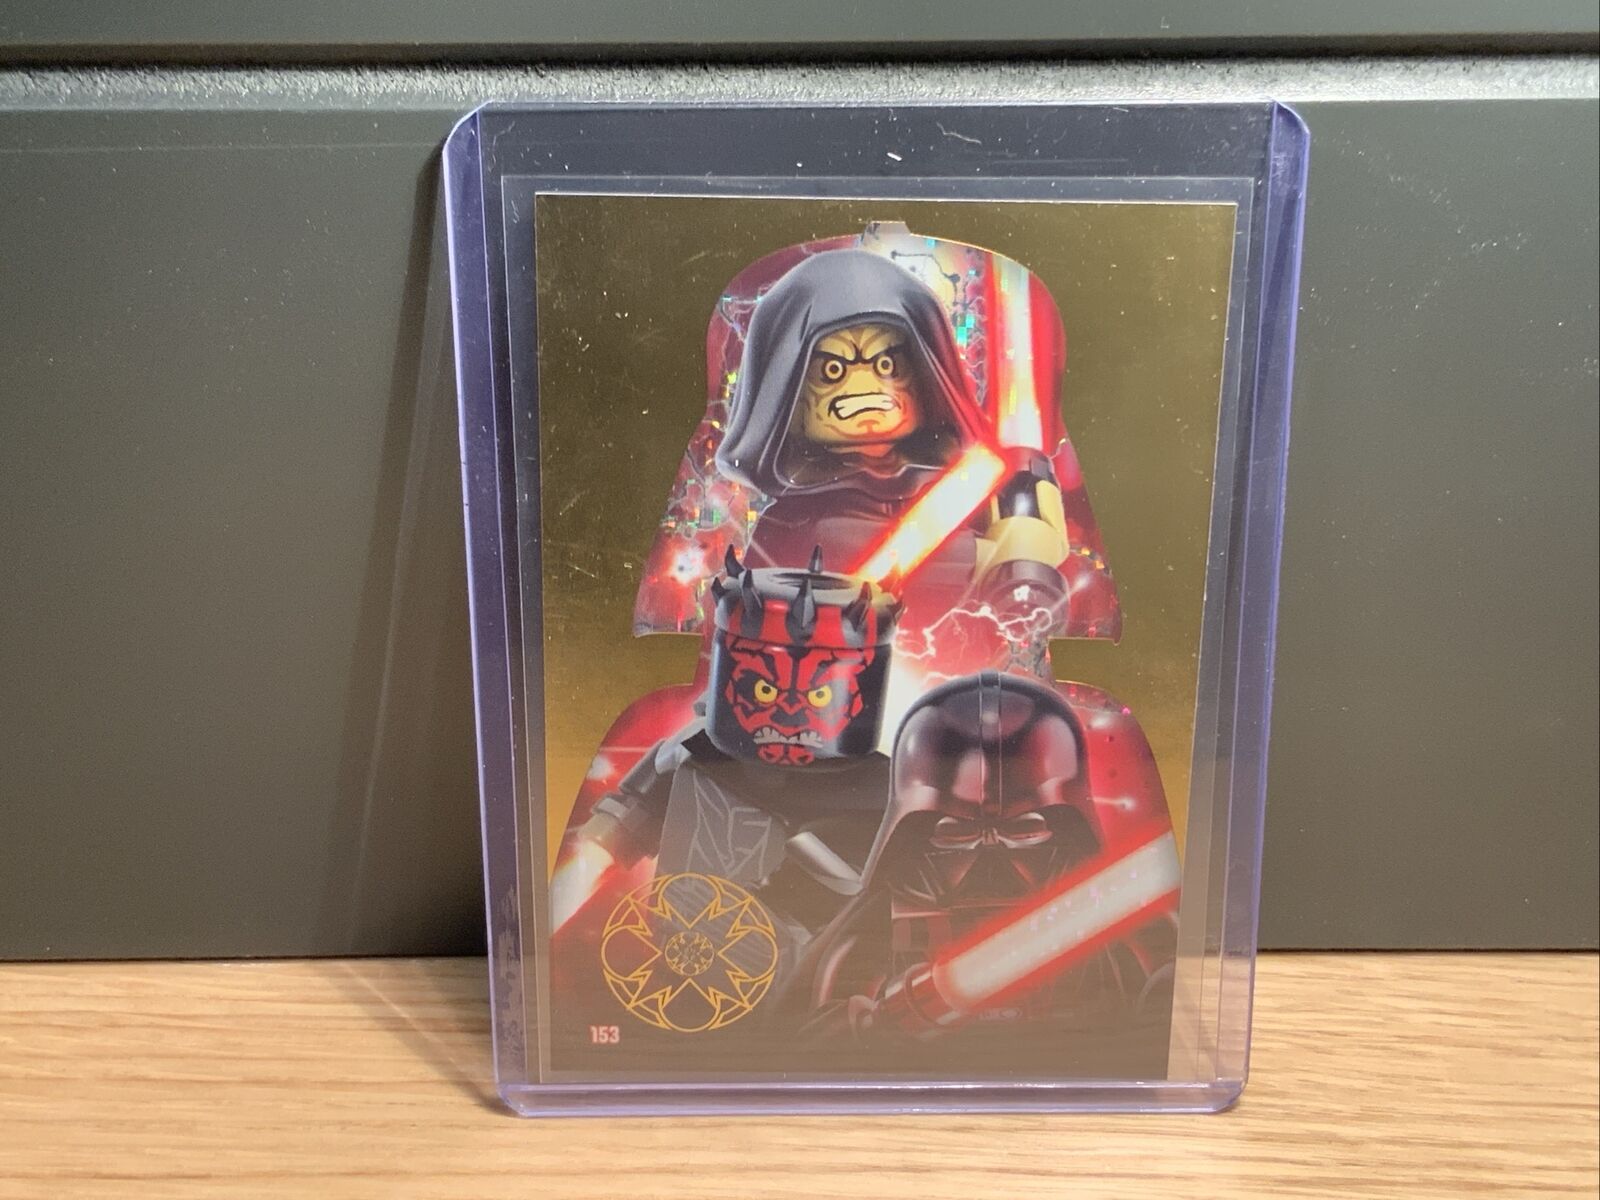 lego starwars trading cards series 1 Card Number 153 Gold Shiny The Sith